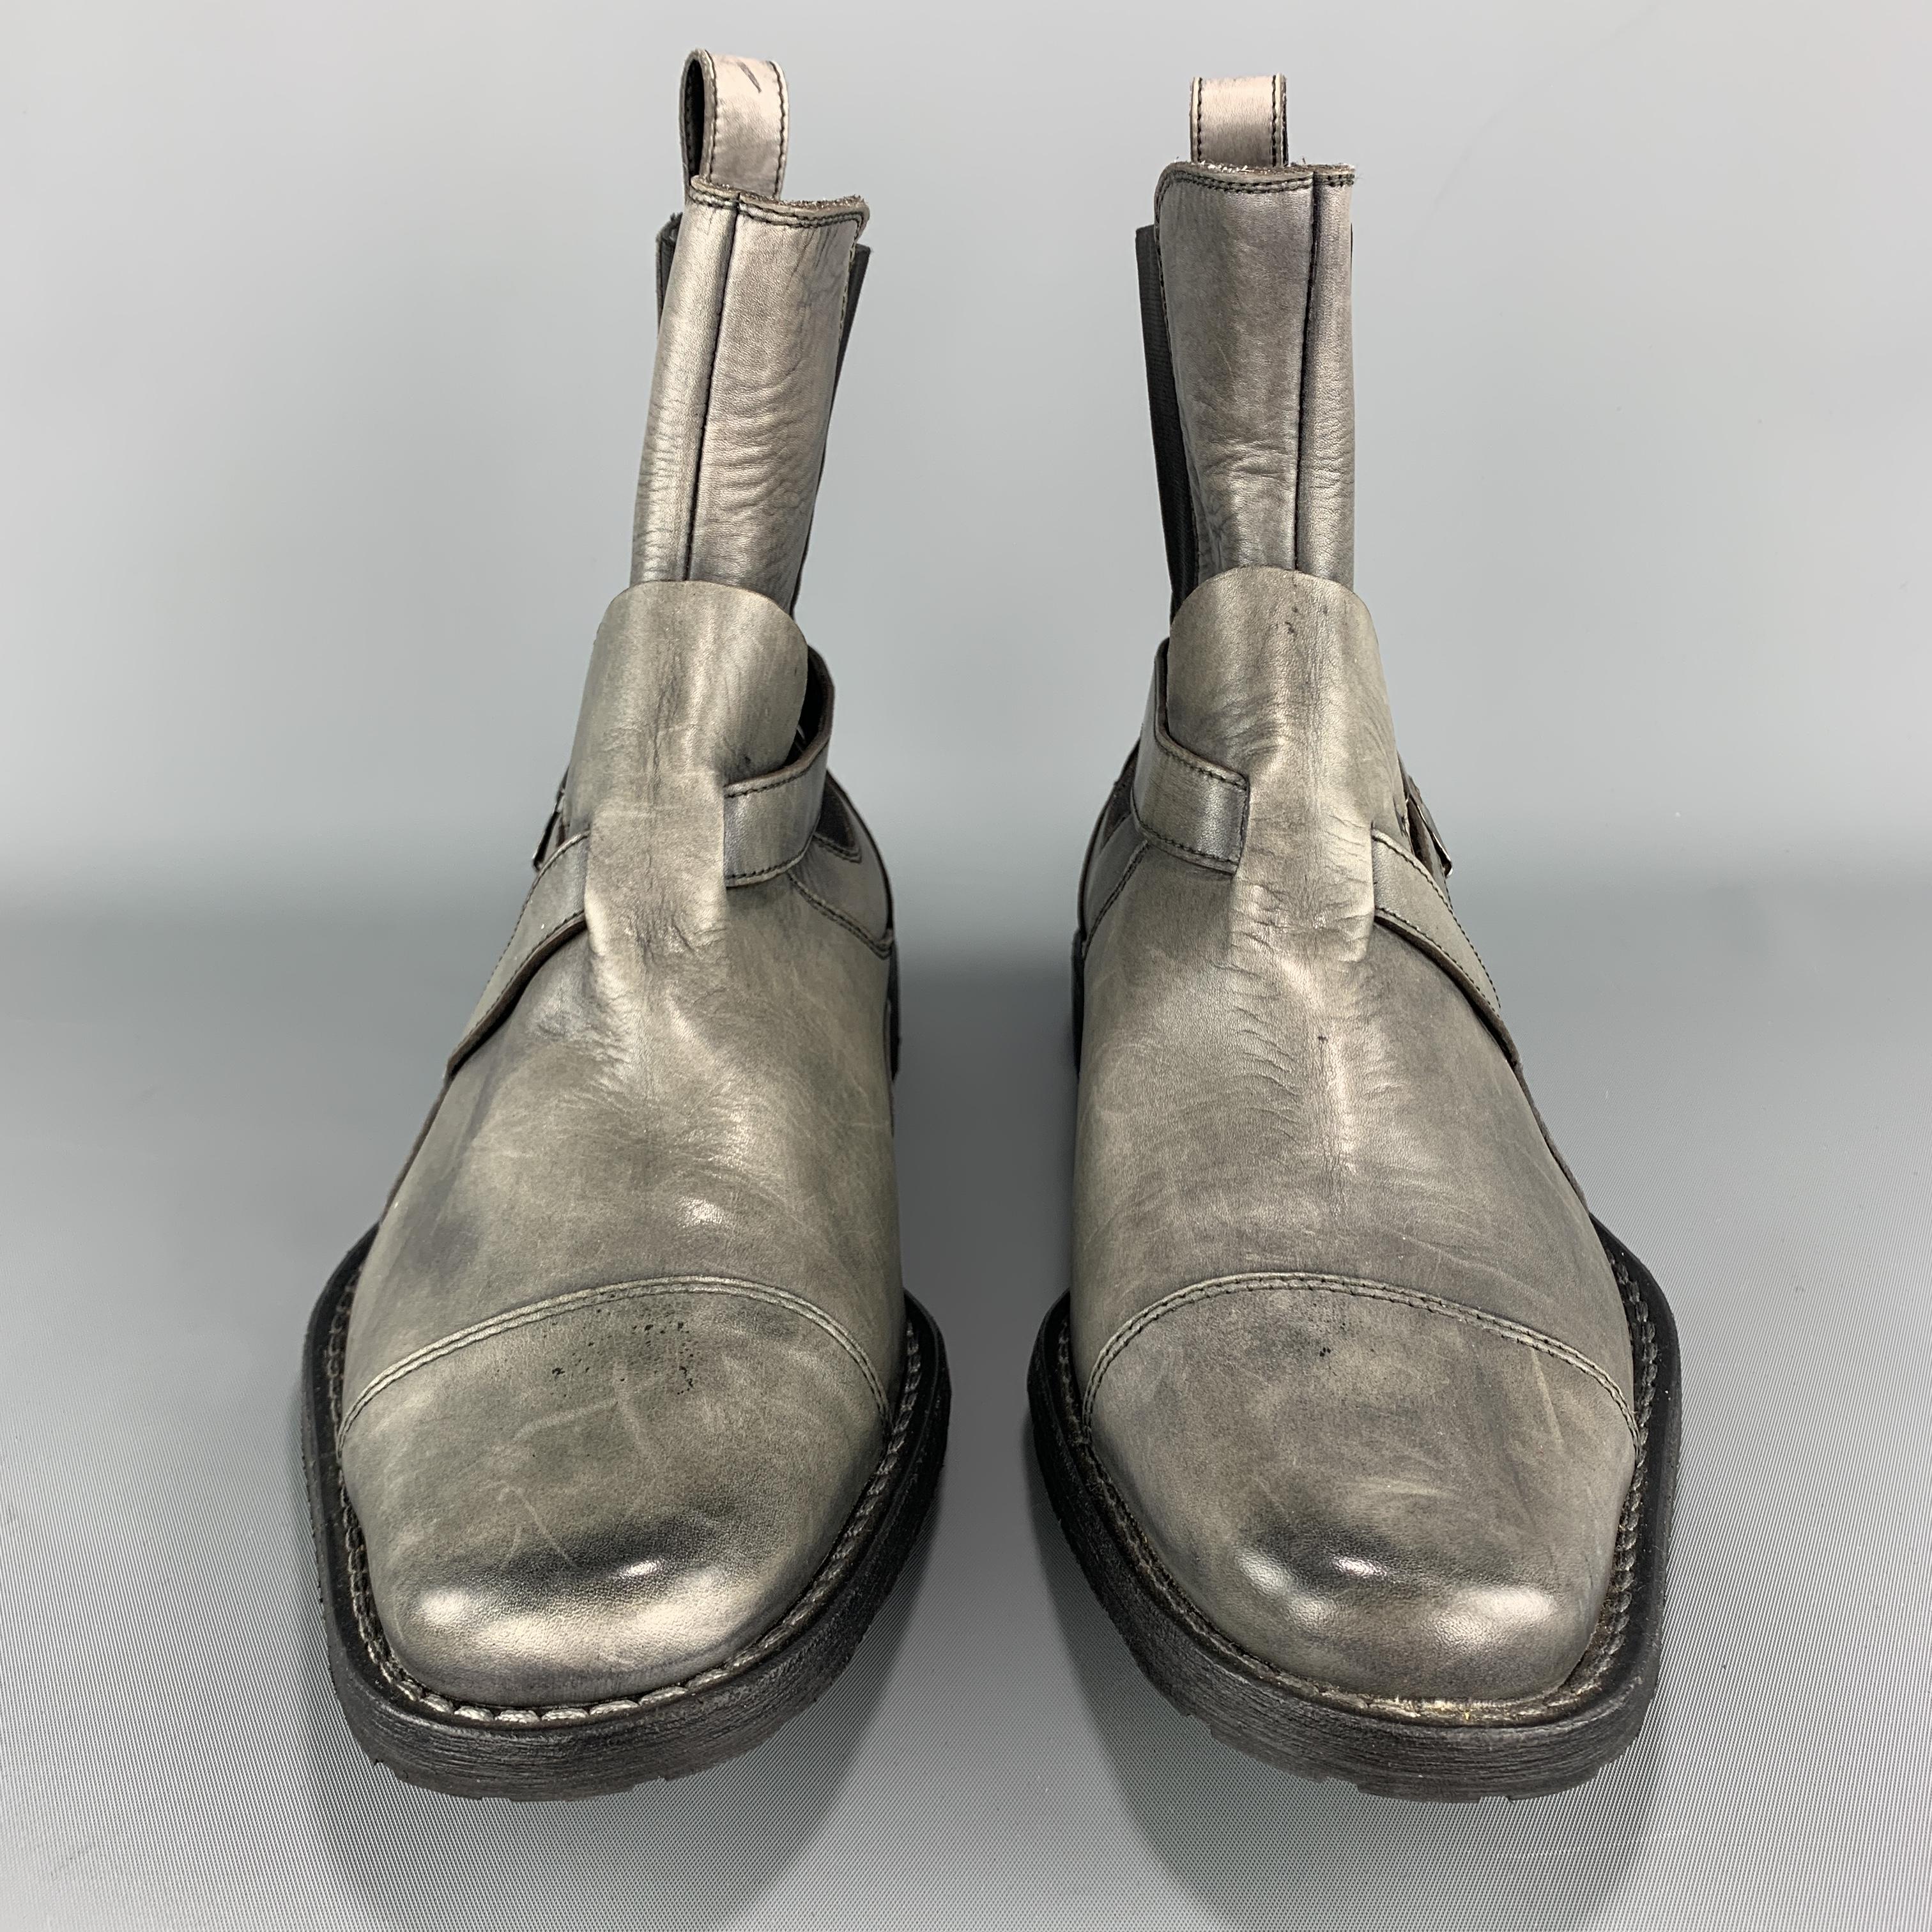 NEIL BARRETT chelsea ankle boots come in antique effect slate gray leather with a toe cap, elasticized sides, and buckled strap details. Made in Italy.

Excellent Pre-Owned Condition.
Marked: IT 40

Measurements:

Outsole: 11.75 x 4.5 in.
Height: